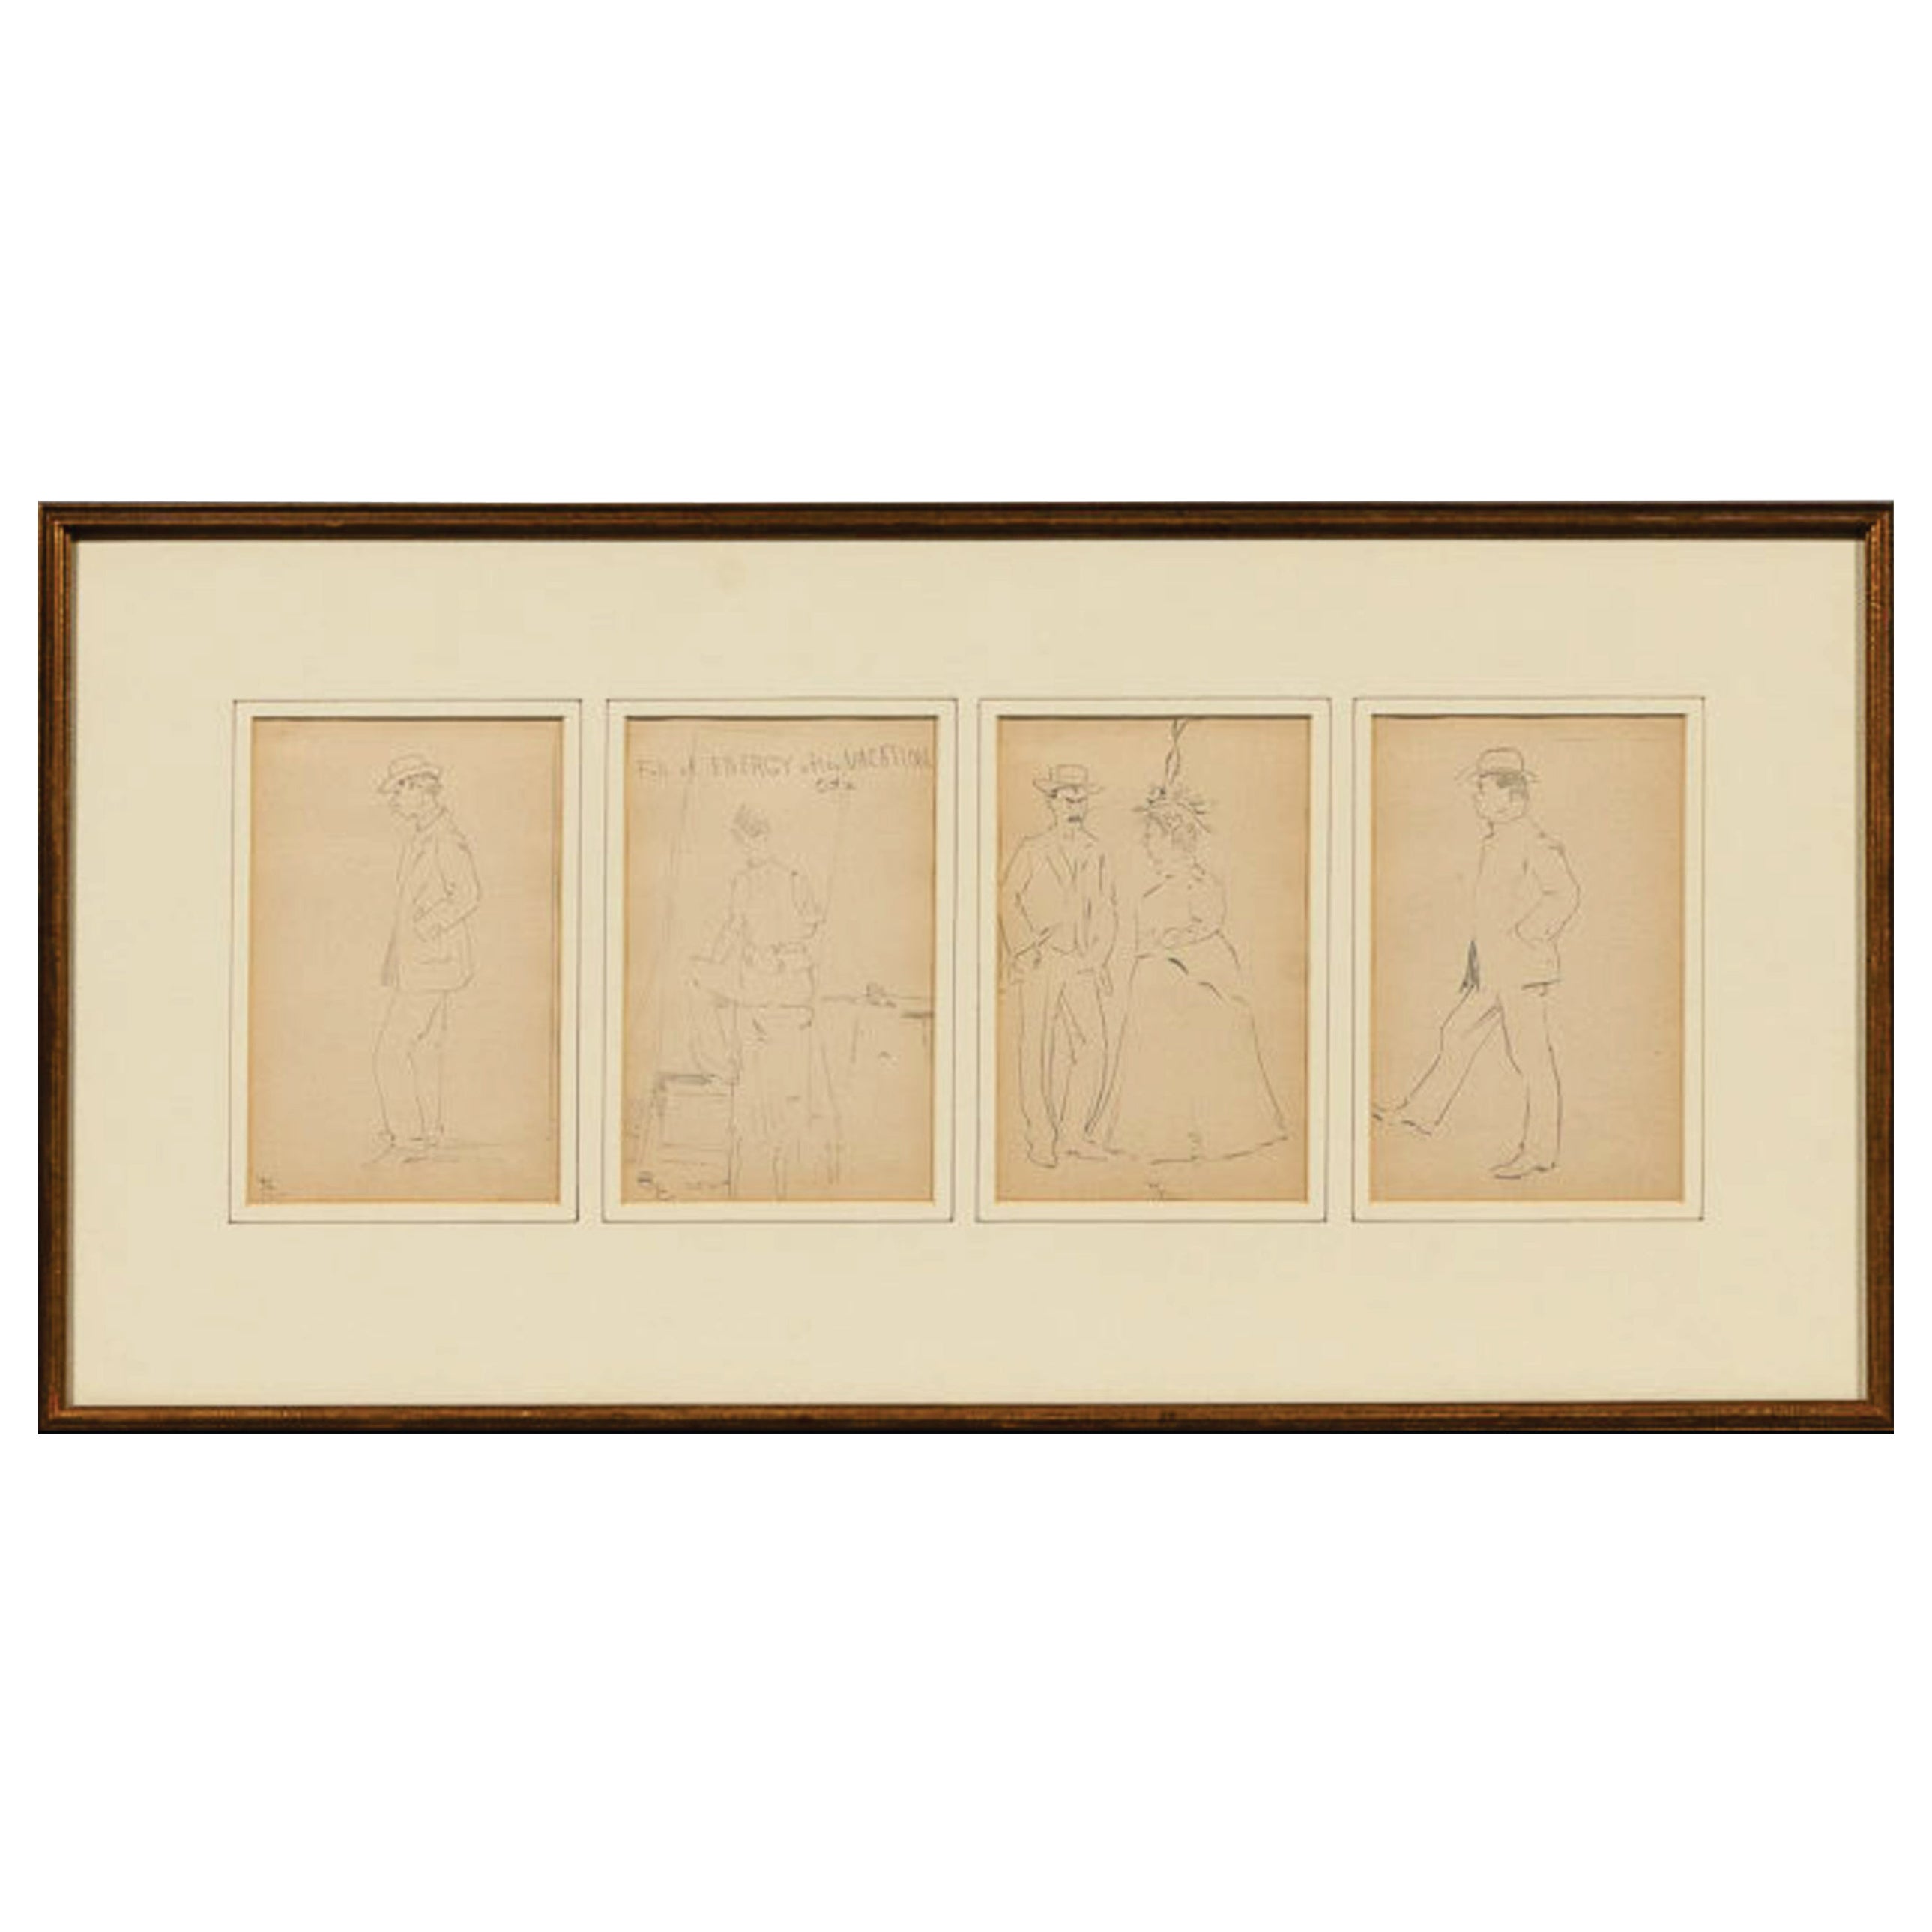 Antique William Worcester Churchill (1858 - 1926) 4 Drawings, 1908 signed 'WC'